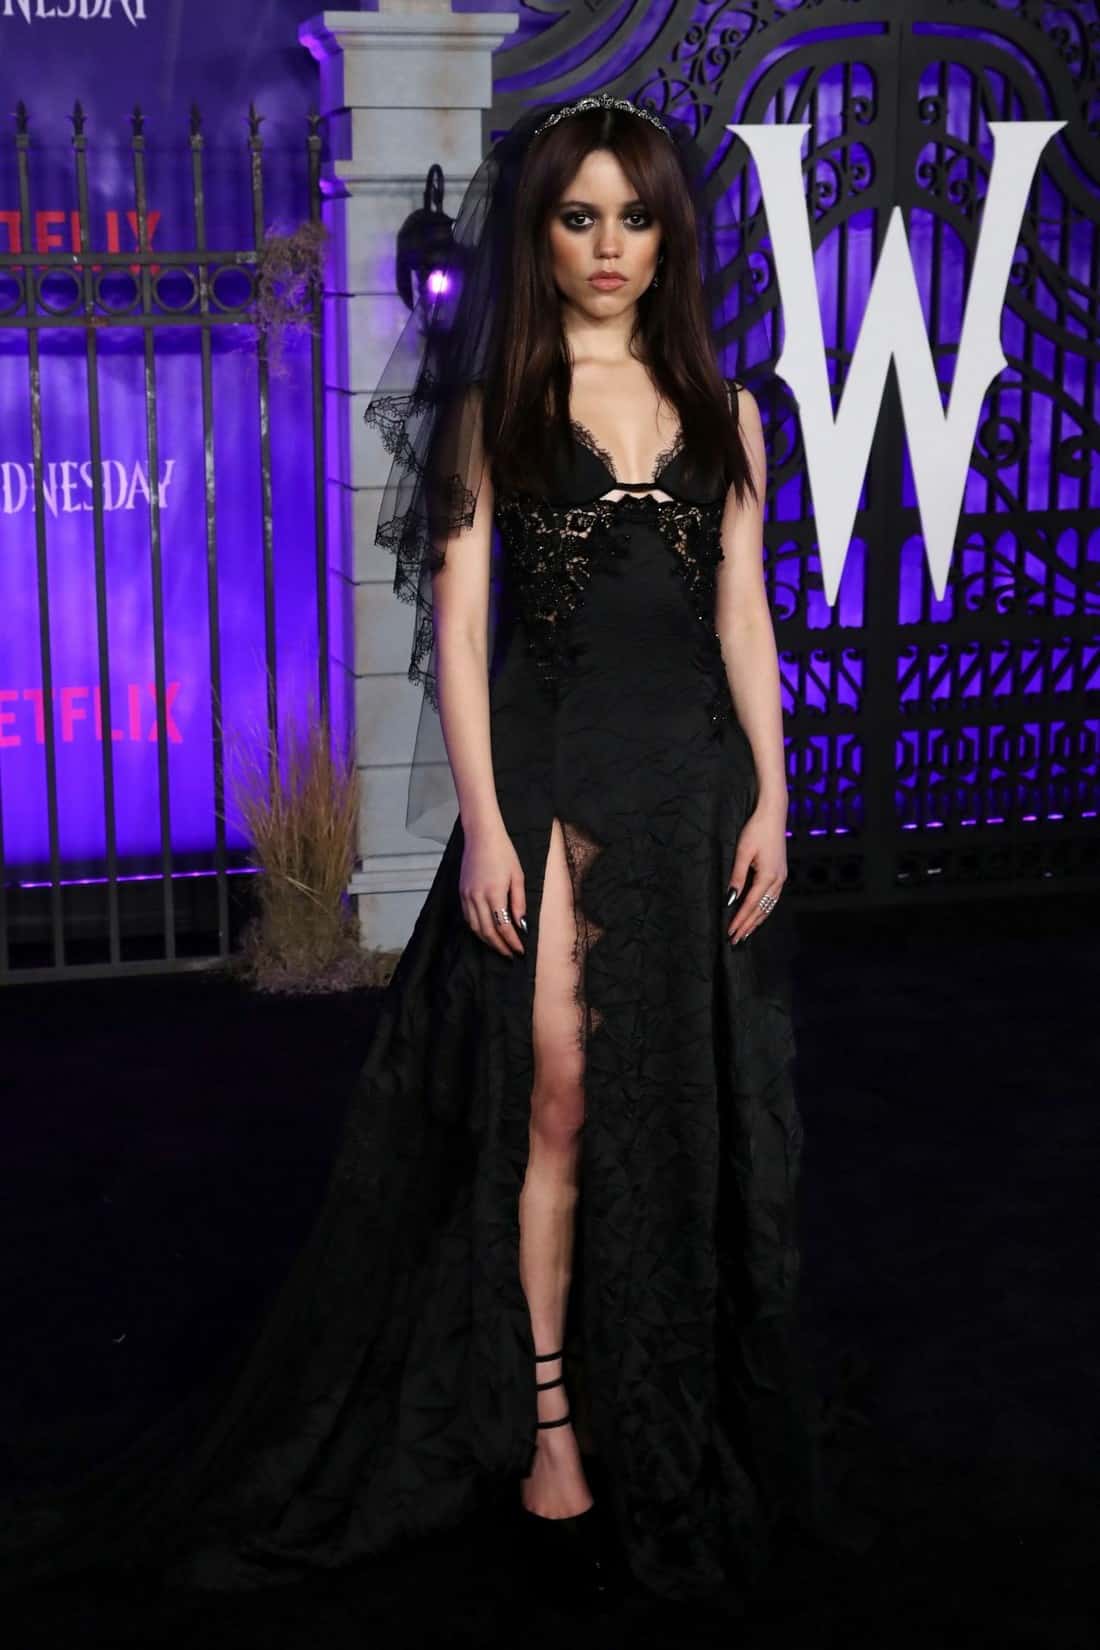 Jenna Ortega Makes a Statement on the Red Carpet with Her Gothic Bride Look